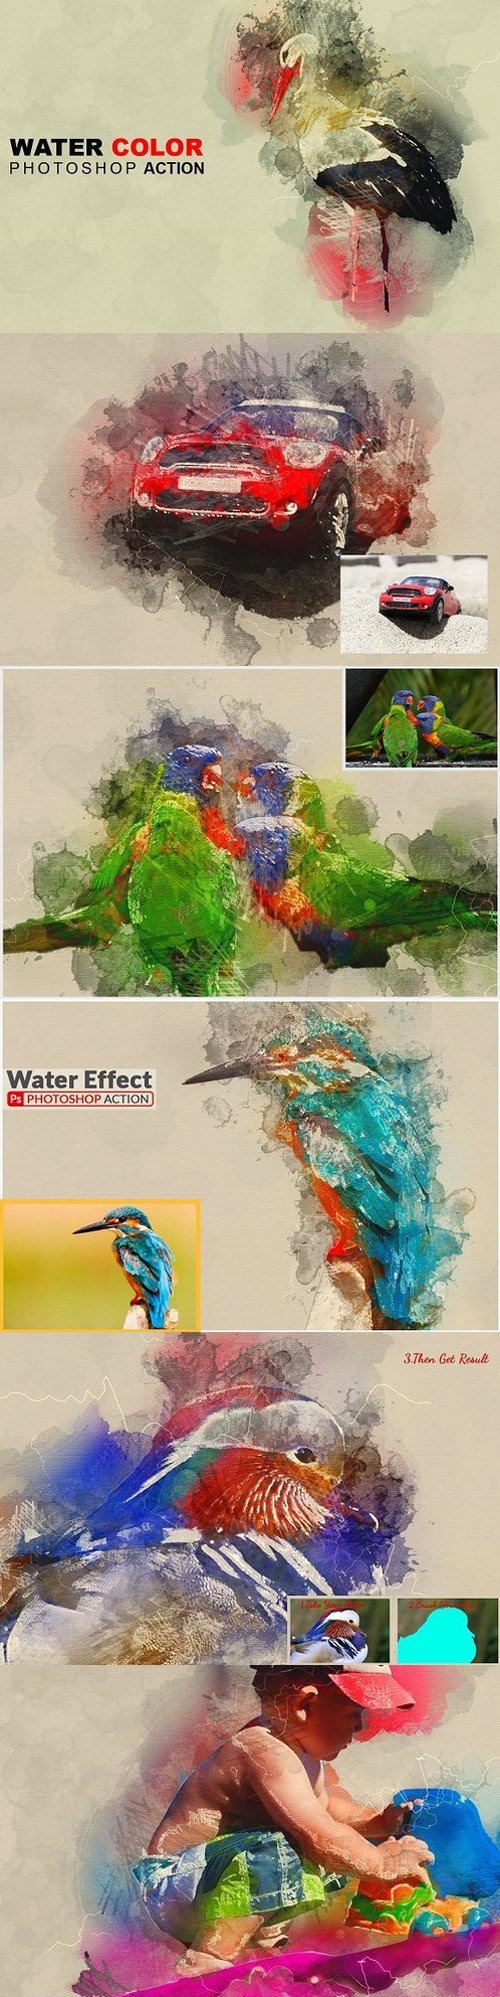 Water Color Photoshop Action 1573158